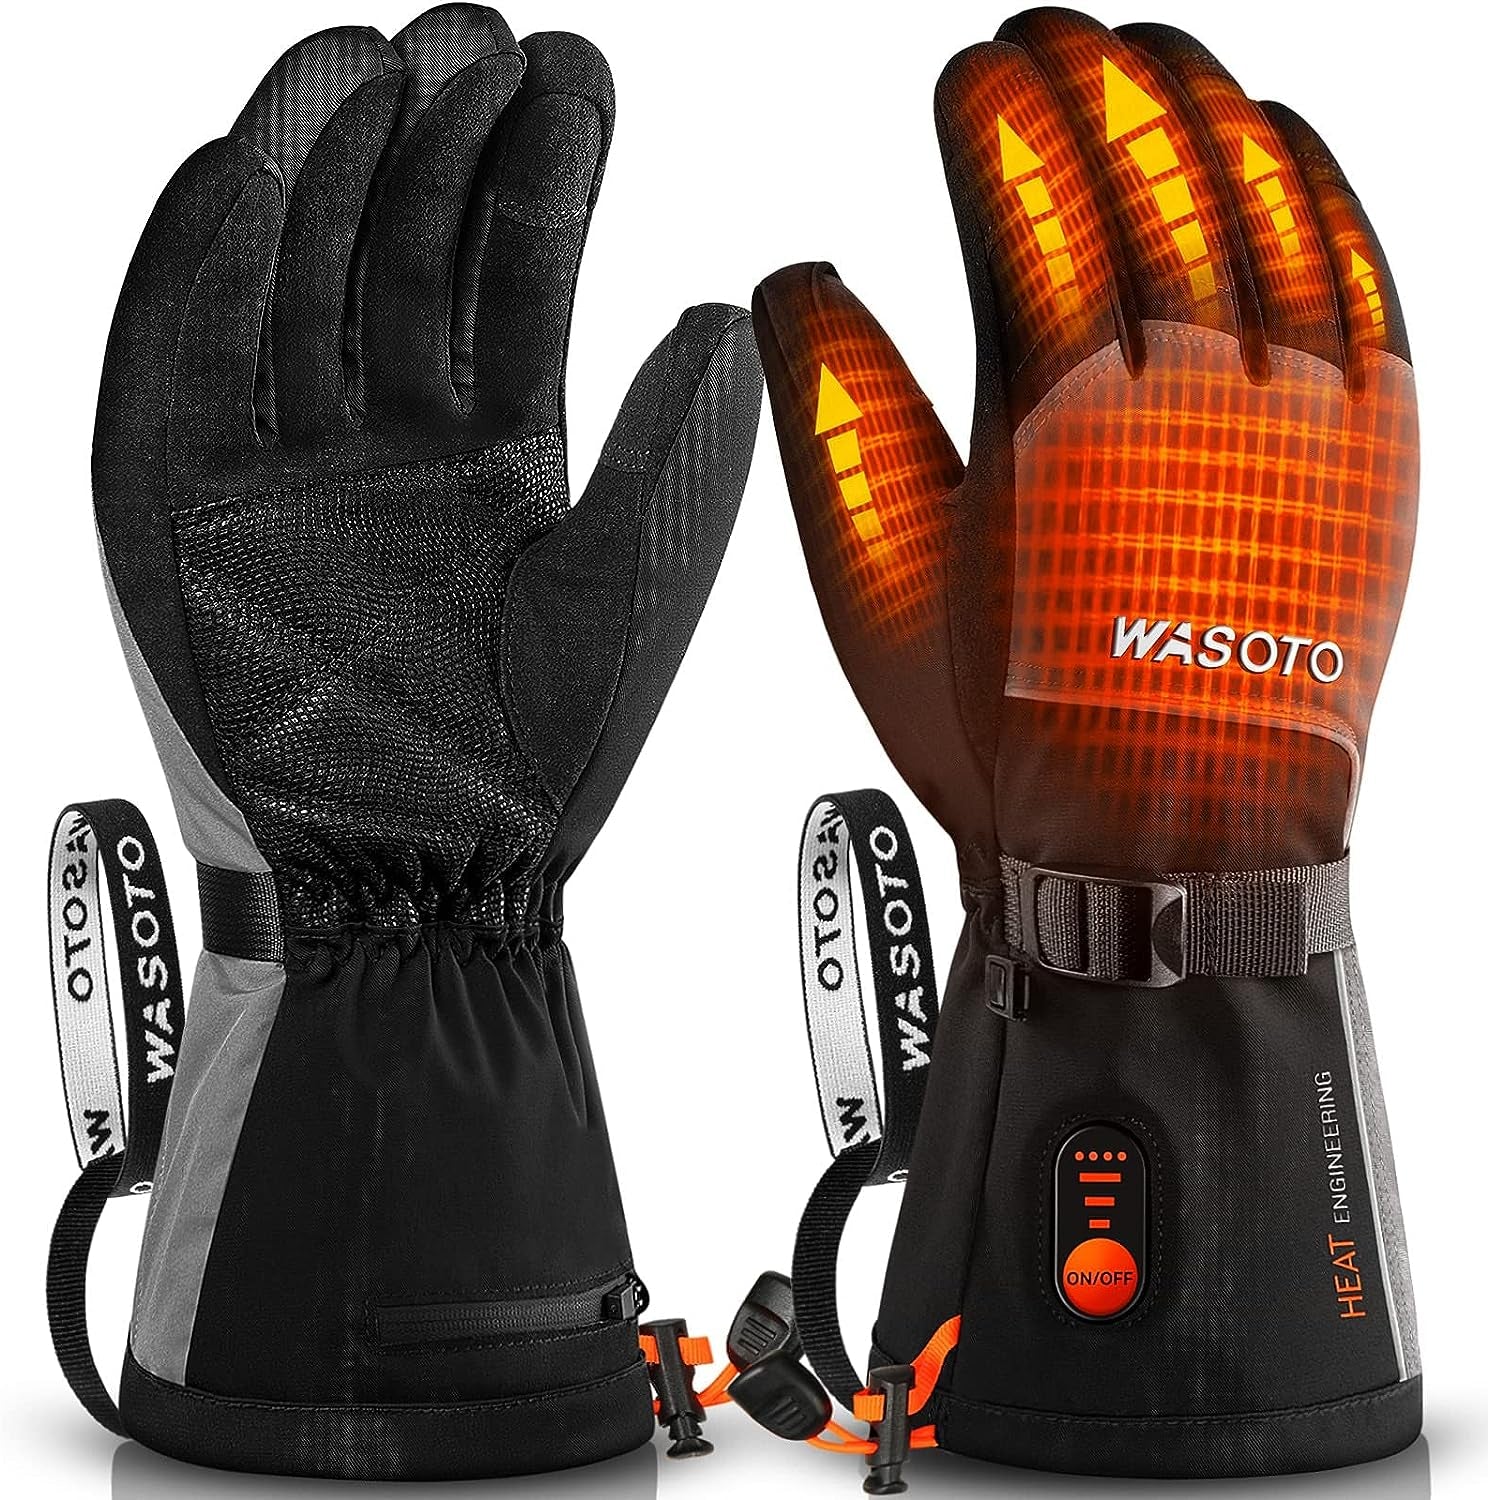 Rechargeable Touchscreen Waterproof Electric Heated Gloves Unisex for Winter – Skiing Hiking